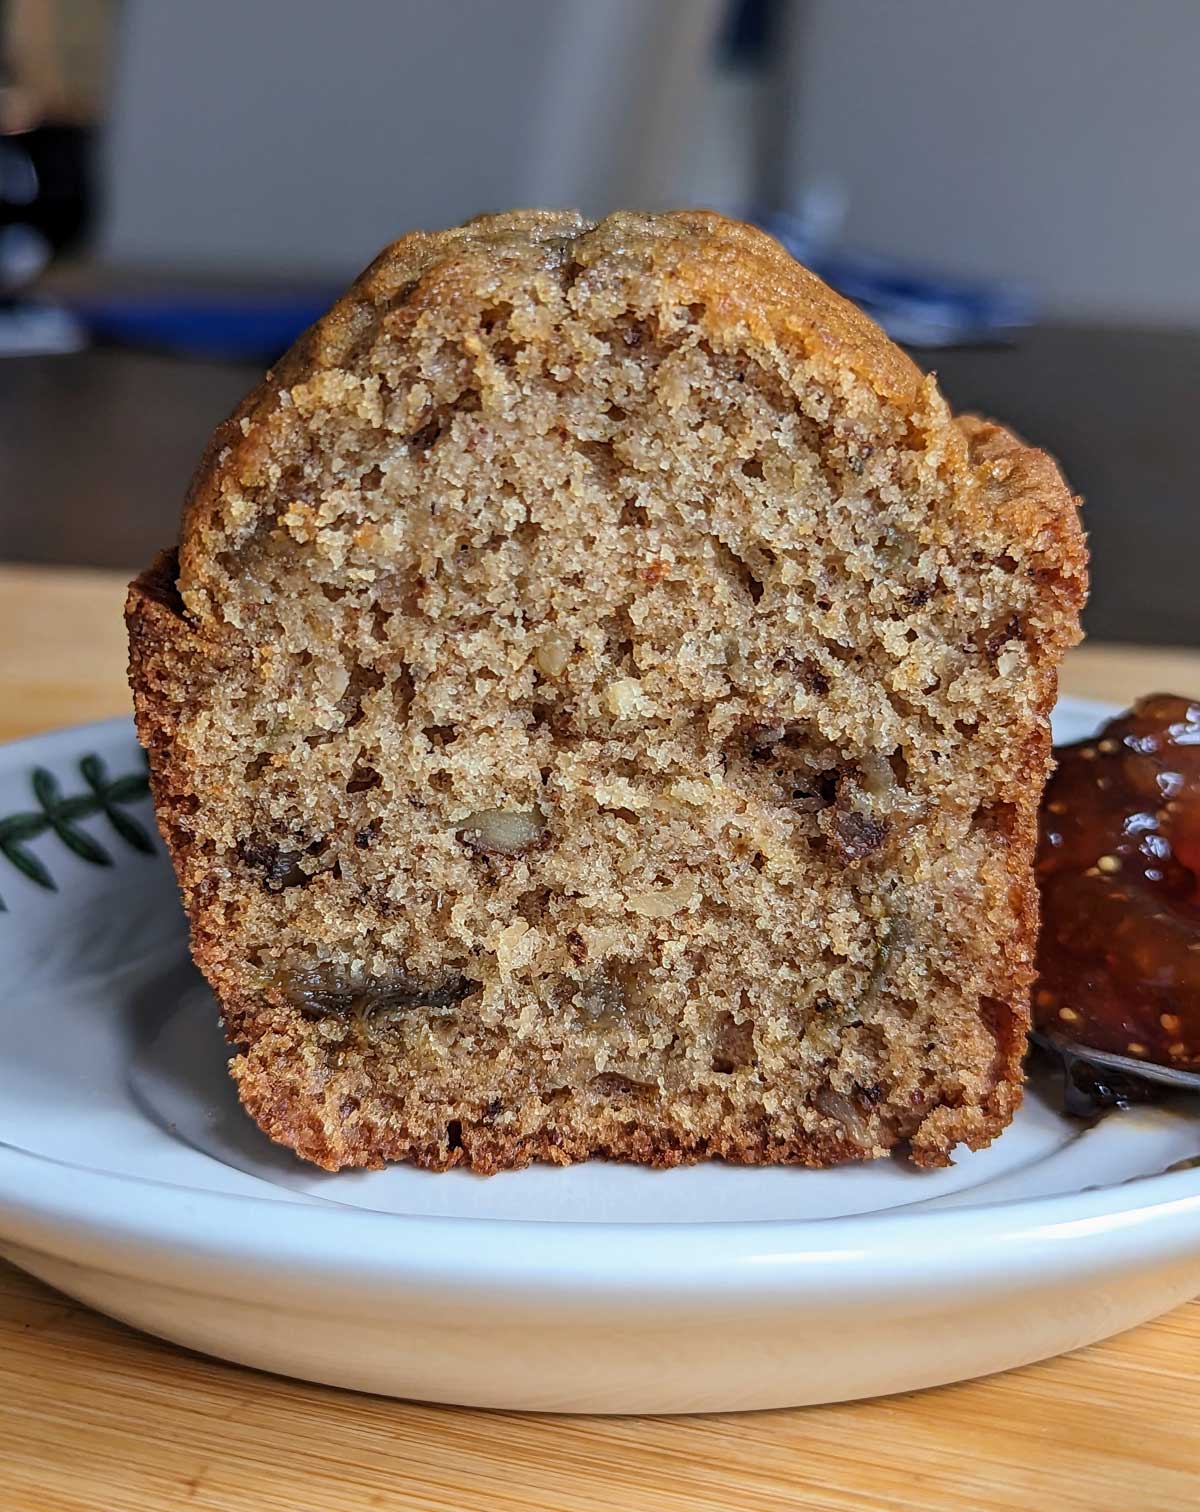 Spiced Quick Bread cut to show texture.